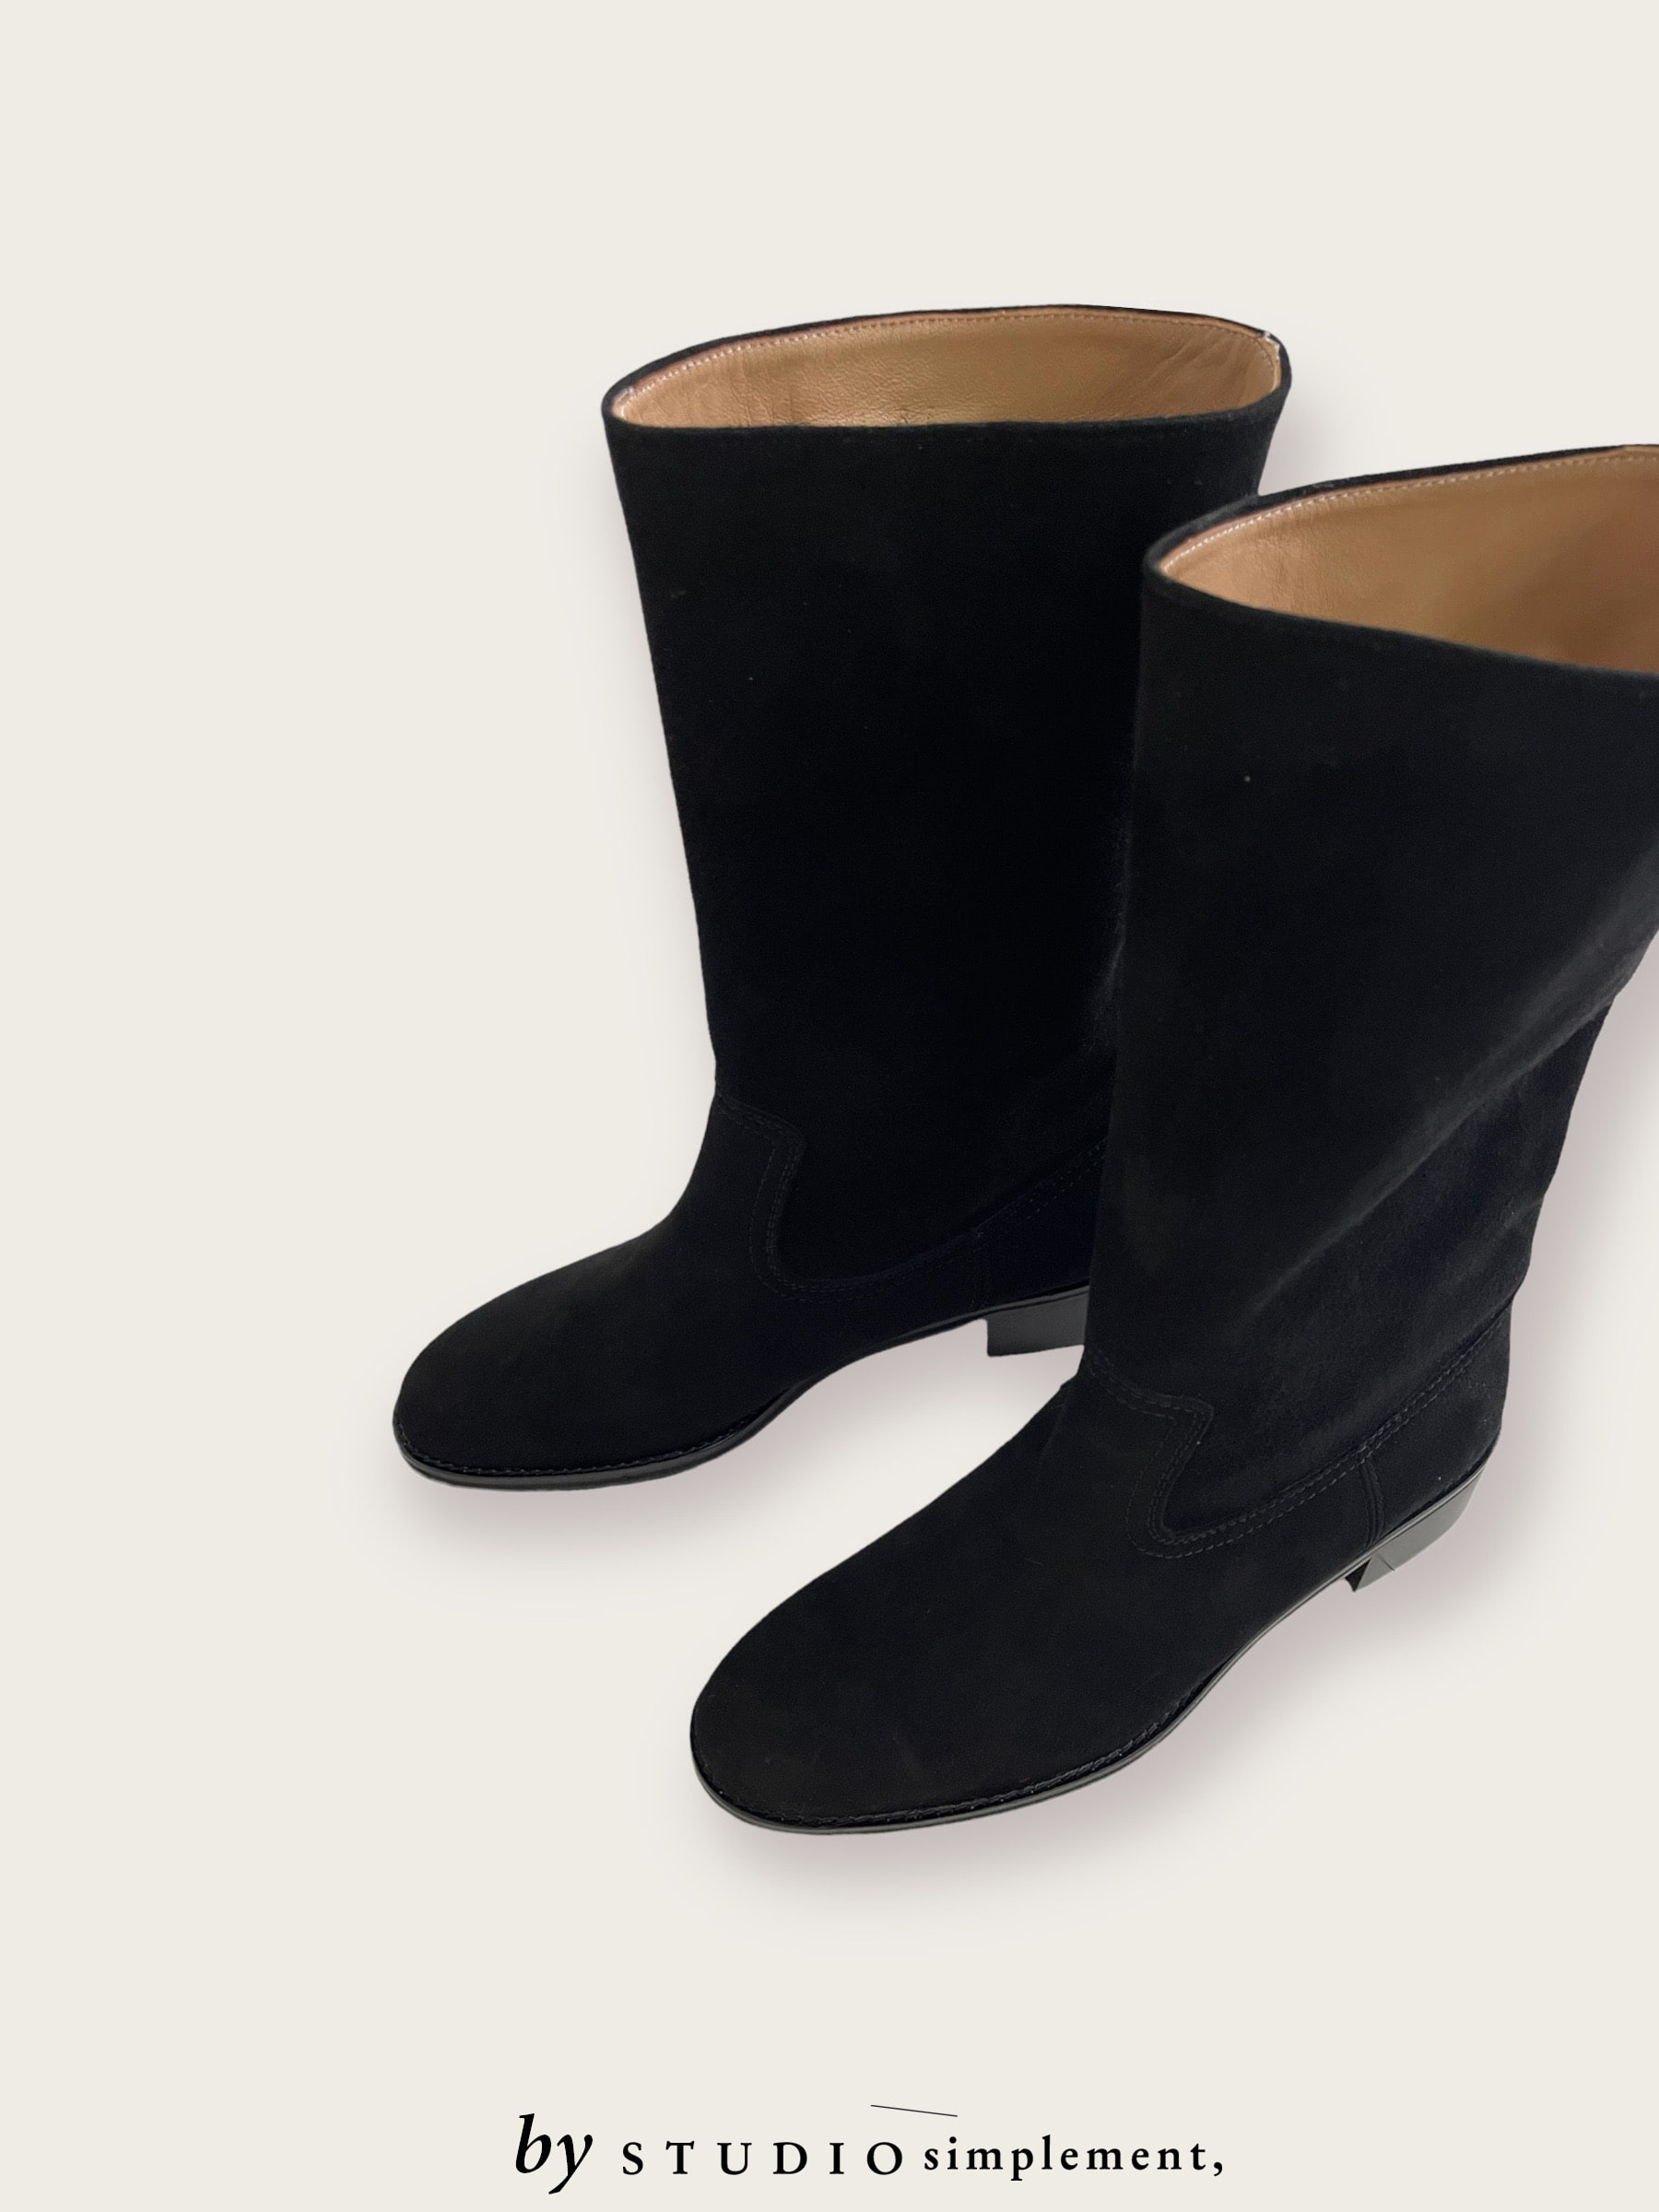 N.Half Boots by S simplement, - black suede